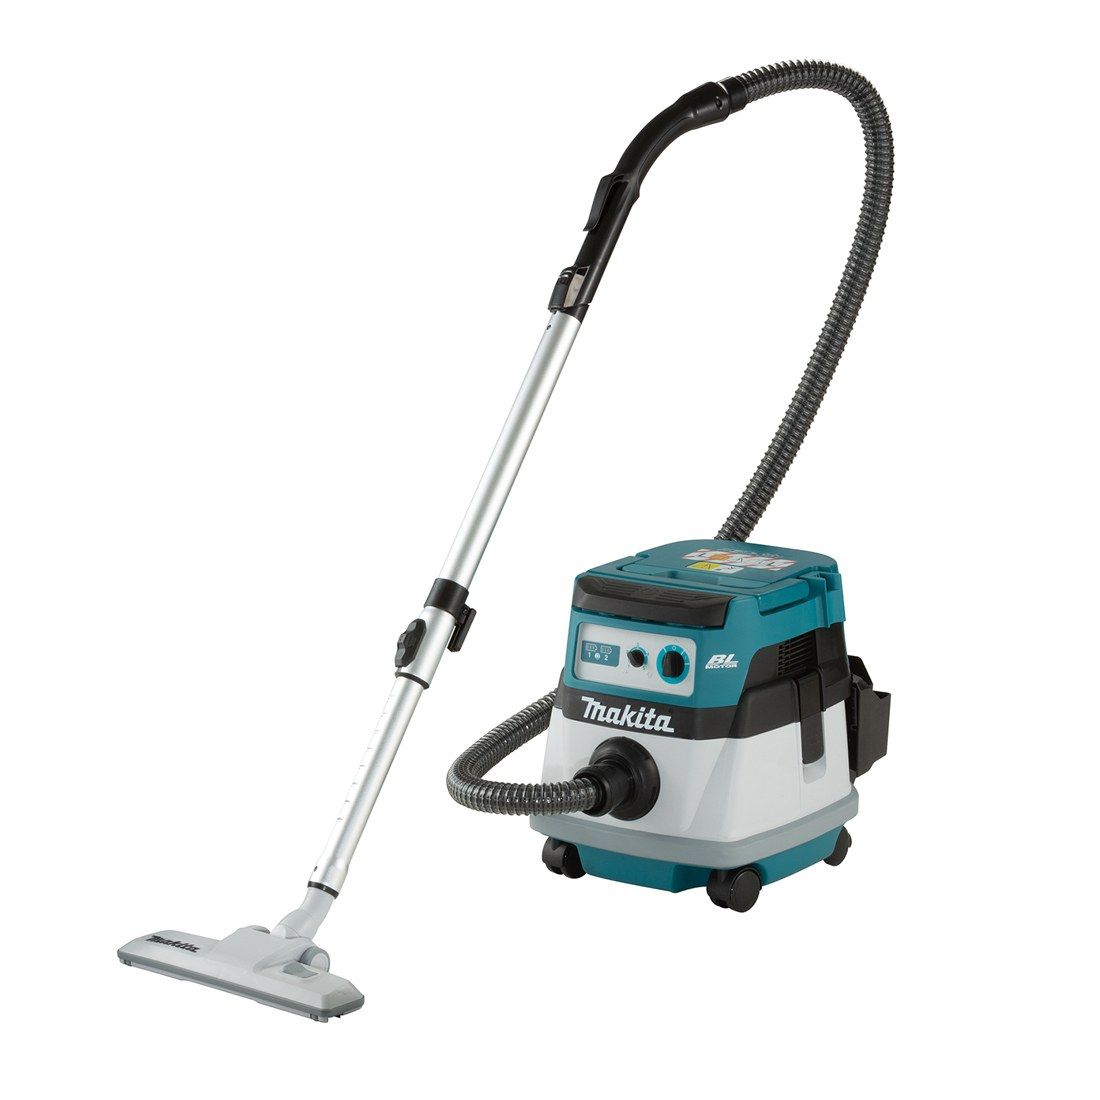 Makita 18V Twin Brushless L-Class Dust Extractor - Wet N Dry - DVC865LZ - Body Only